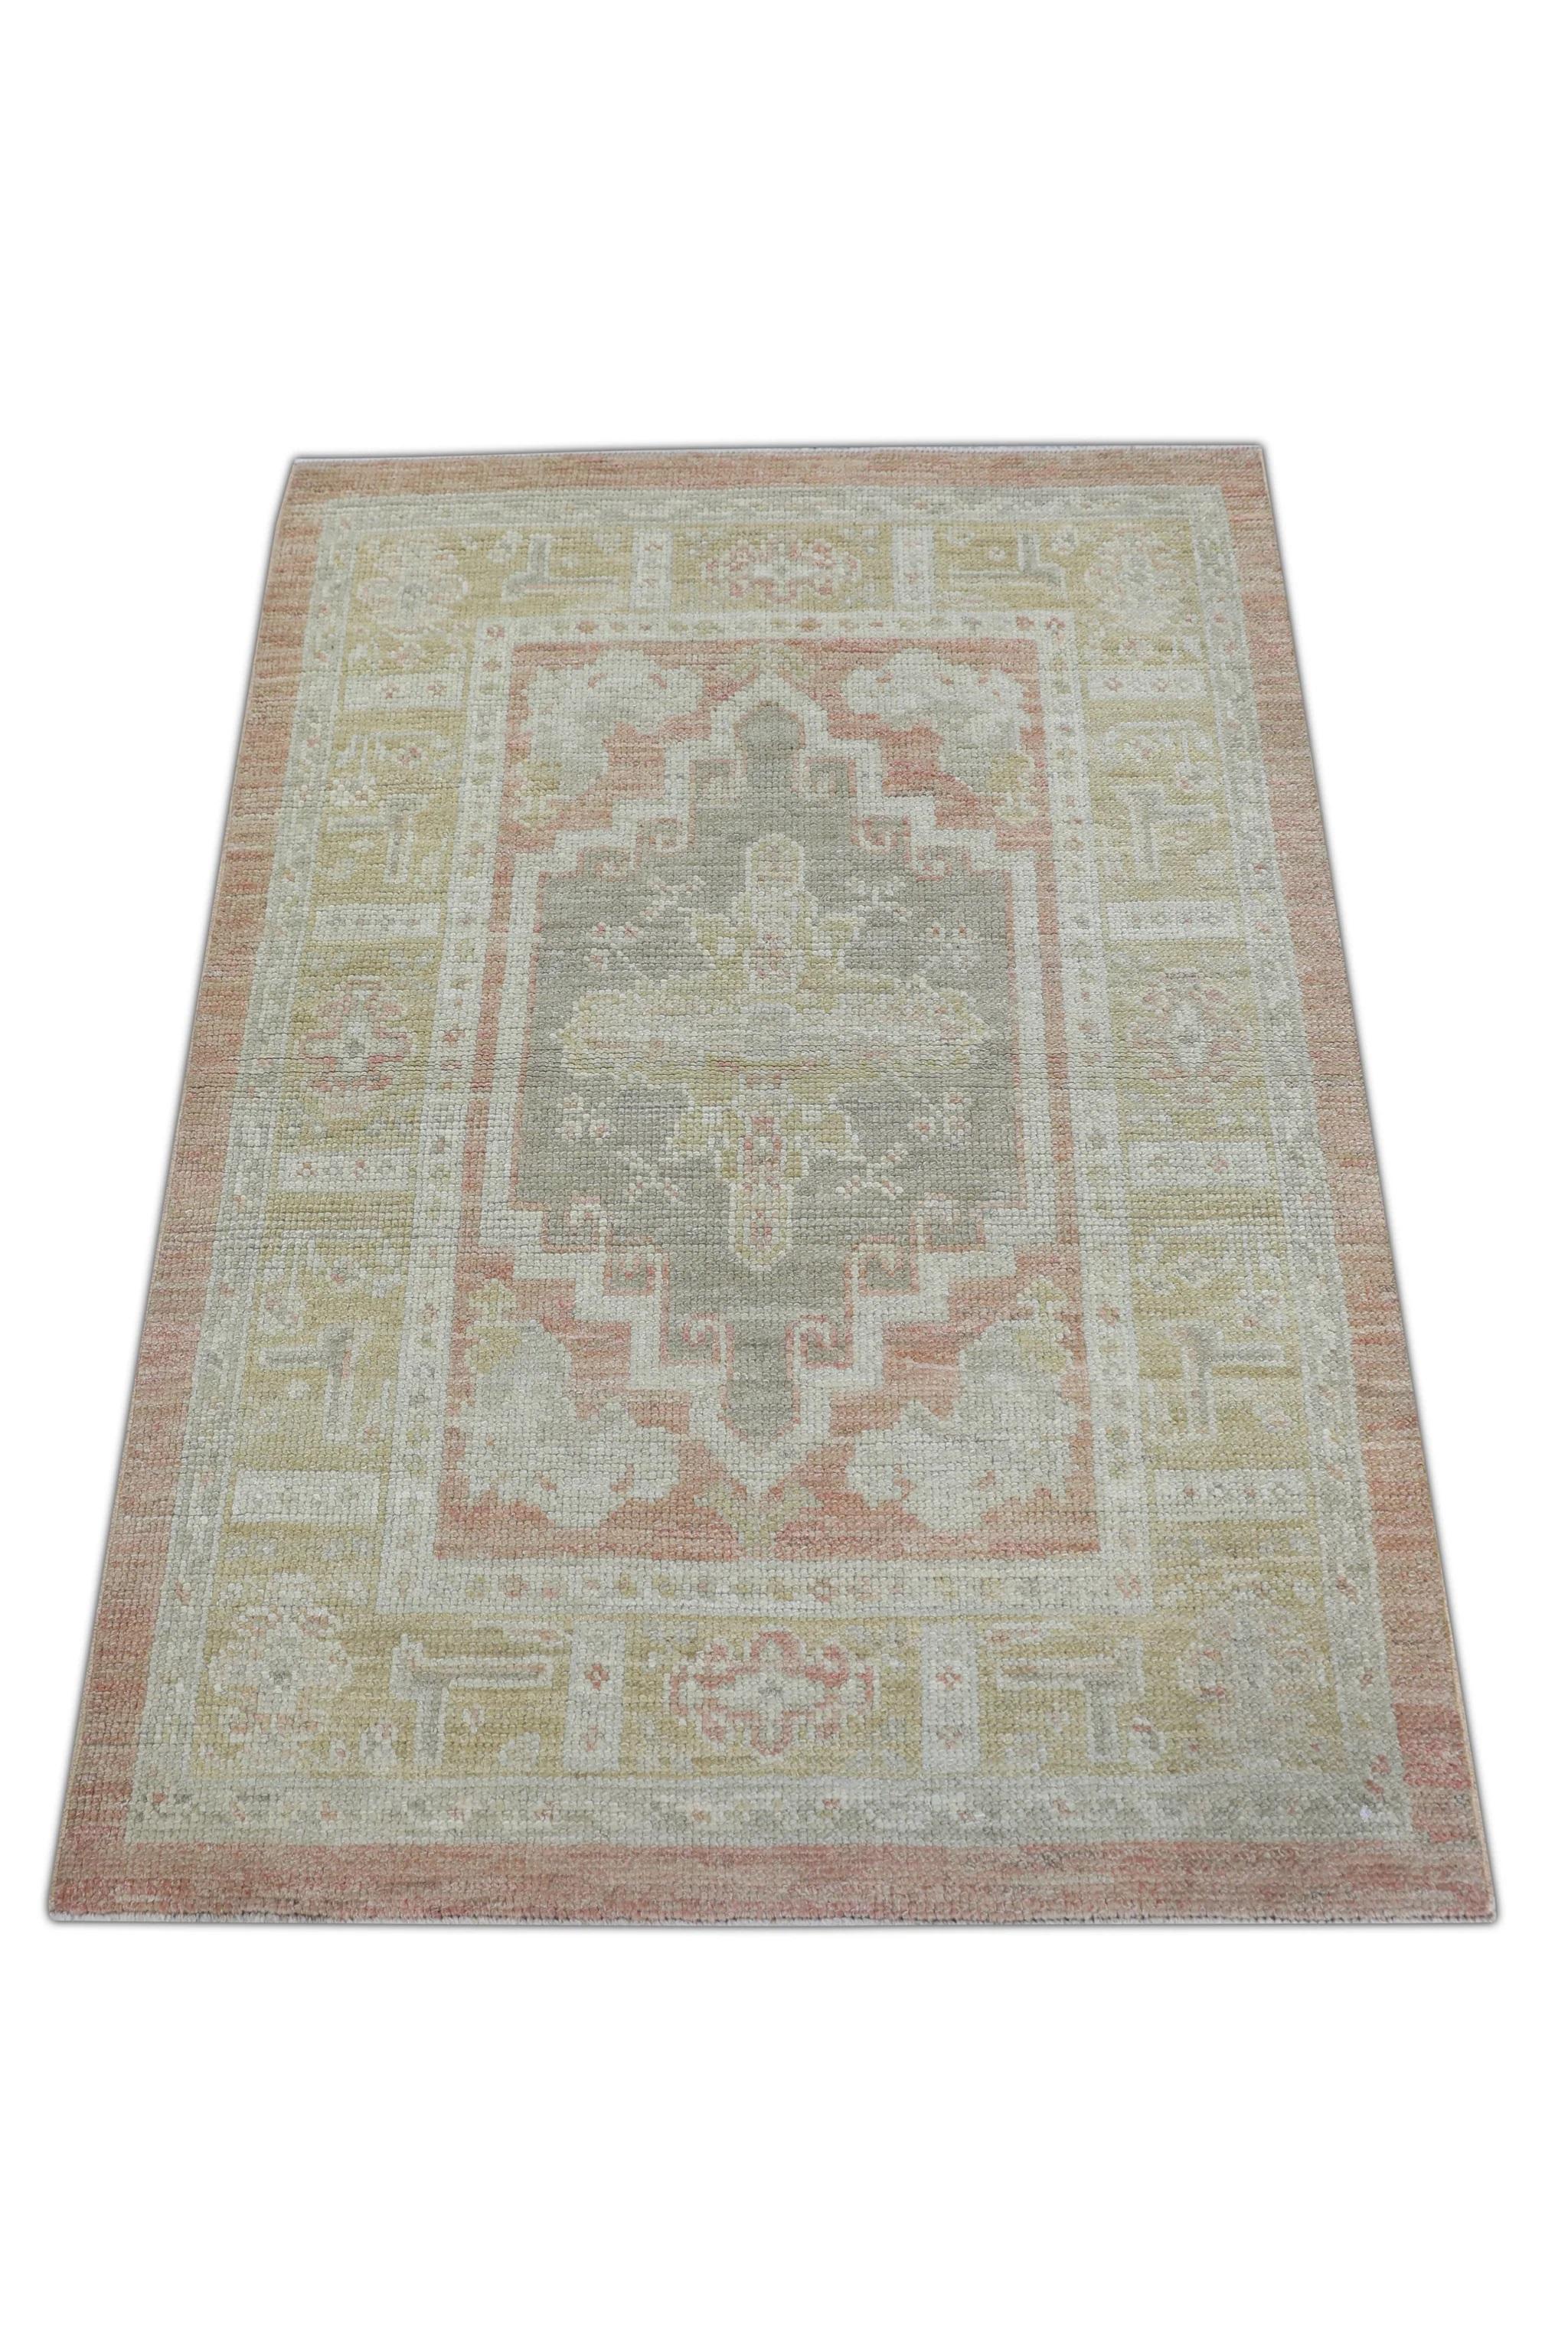 Contemporary Beige & Red Handwoven Wool Turkish Oushak Rug 3' x 4'3